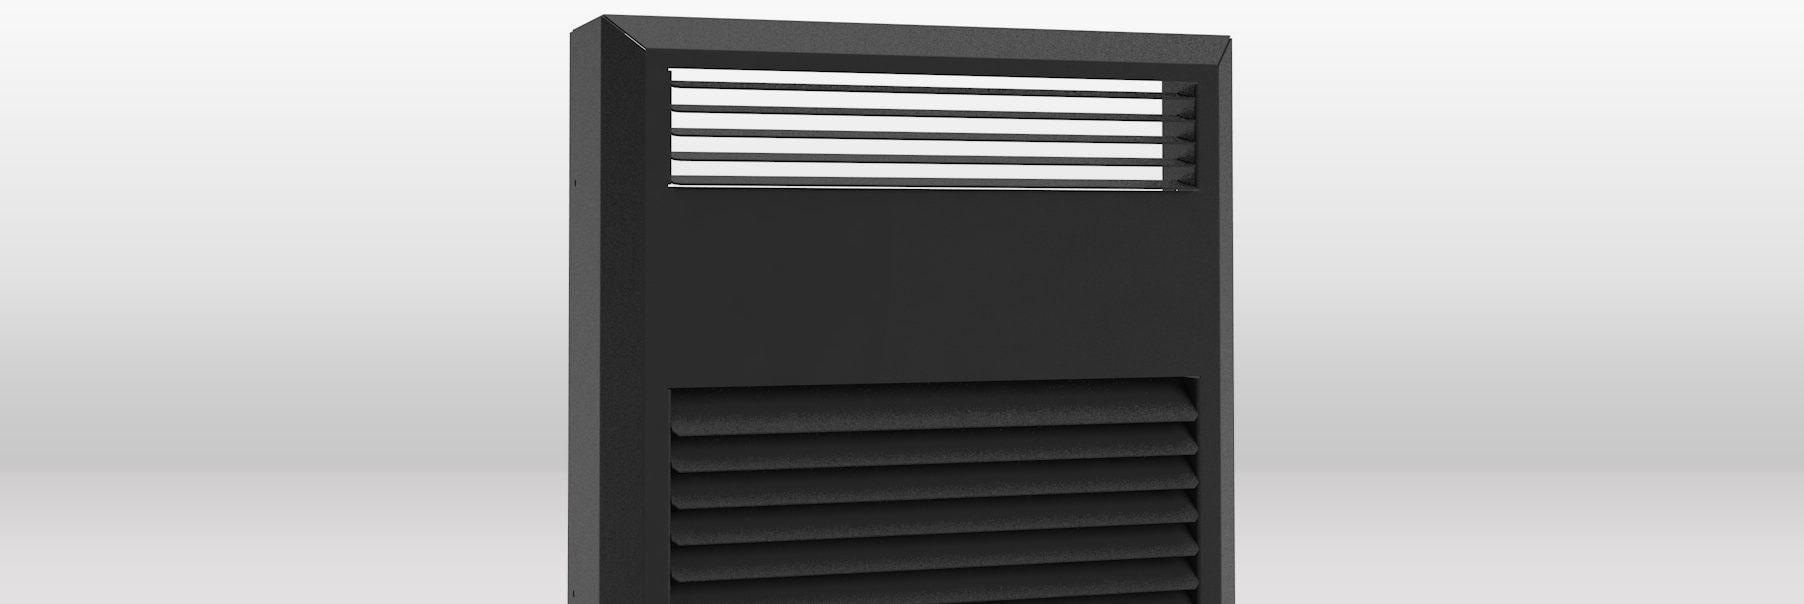 Extreme Exterior Grille Small e1613608055491